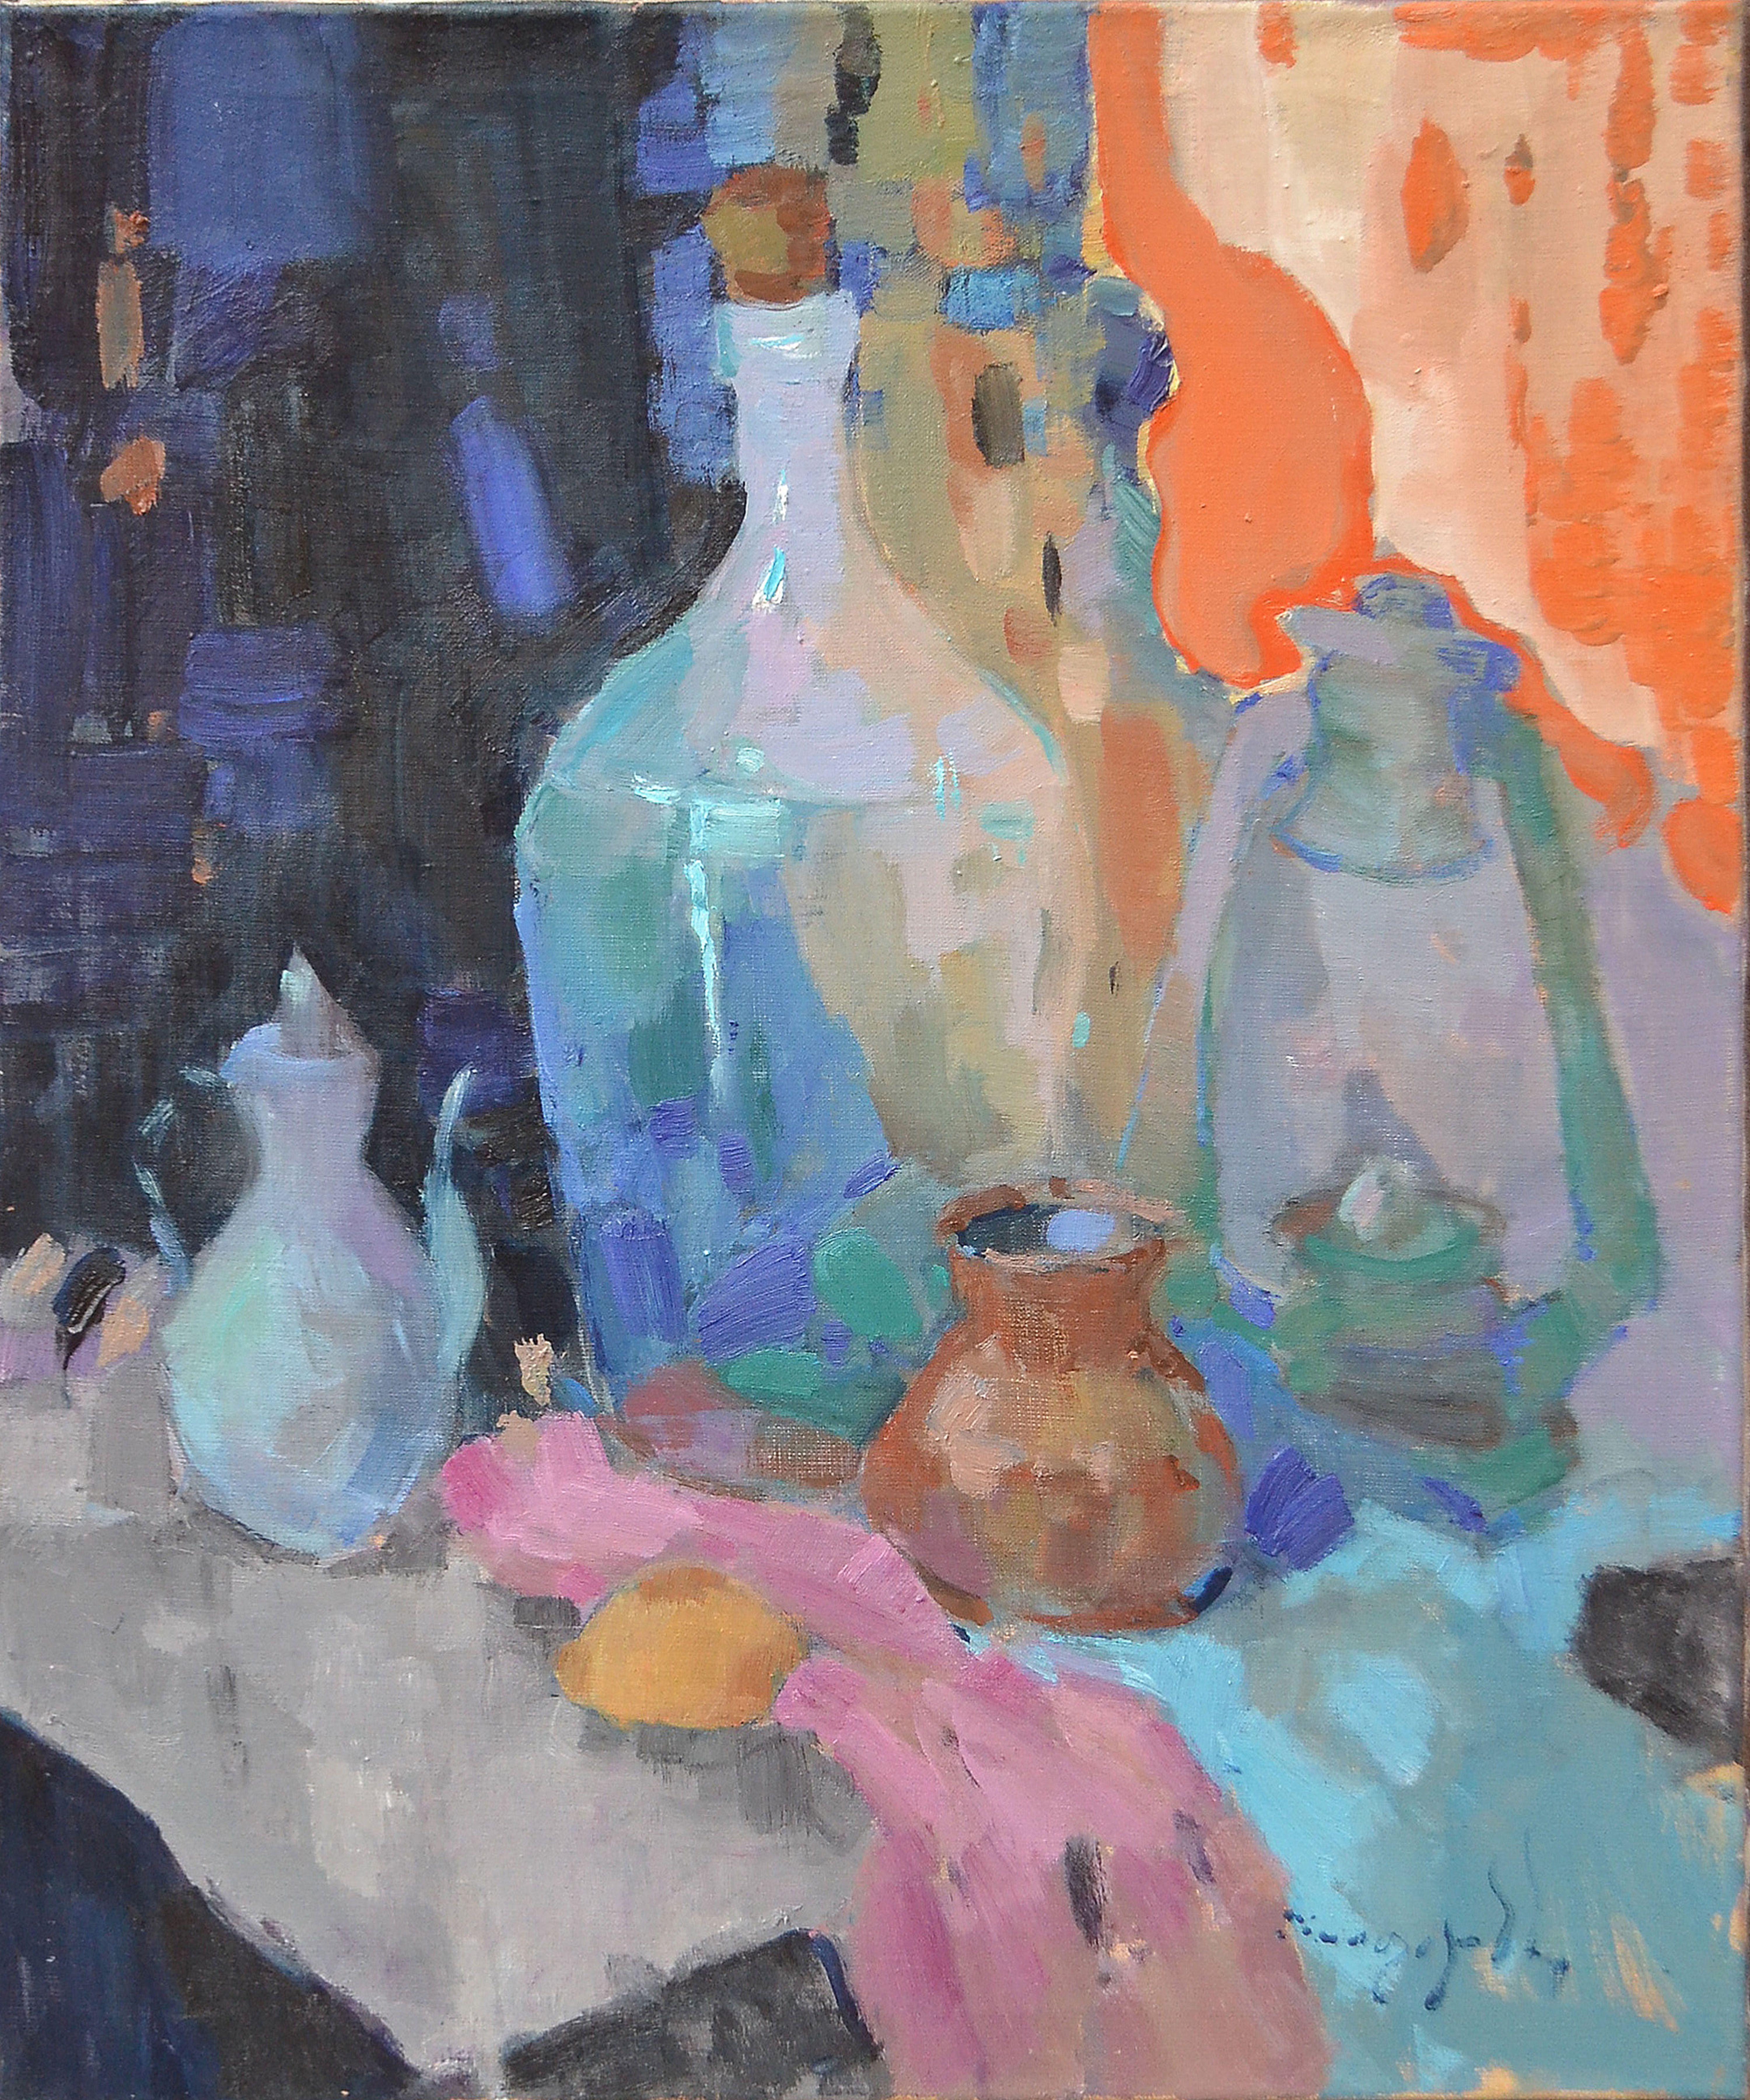 Bottle and lamp _ oil on canvas  2017    Alexander Shandor is an Ukrainian artist, who was born in 1981. He is presently residing there. Master graduated from the Erdeli college, specializing in the metals processing.  Alex is working with an oil on